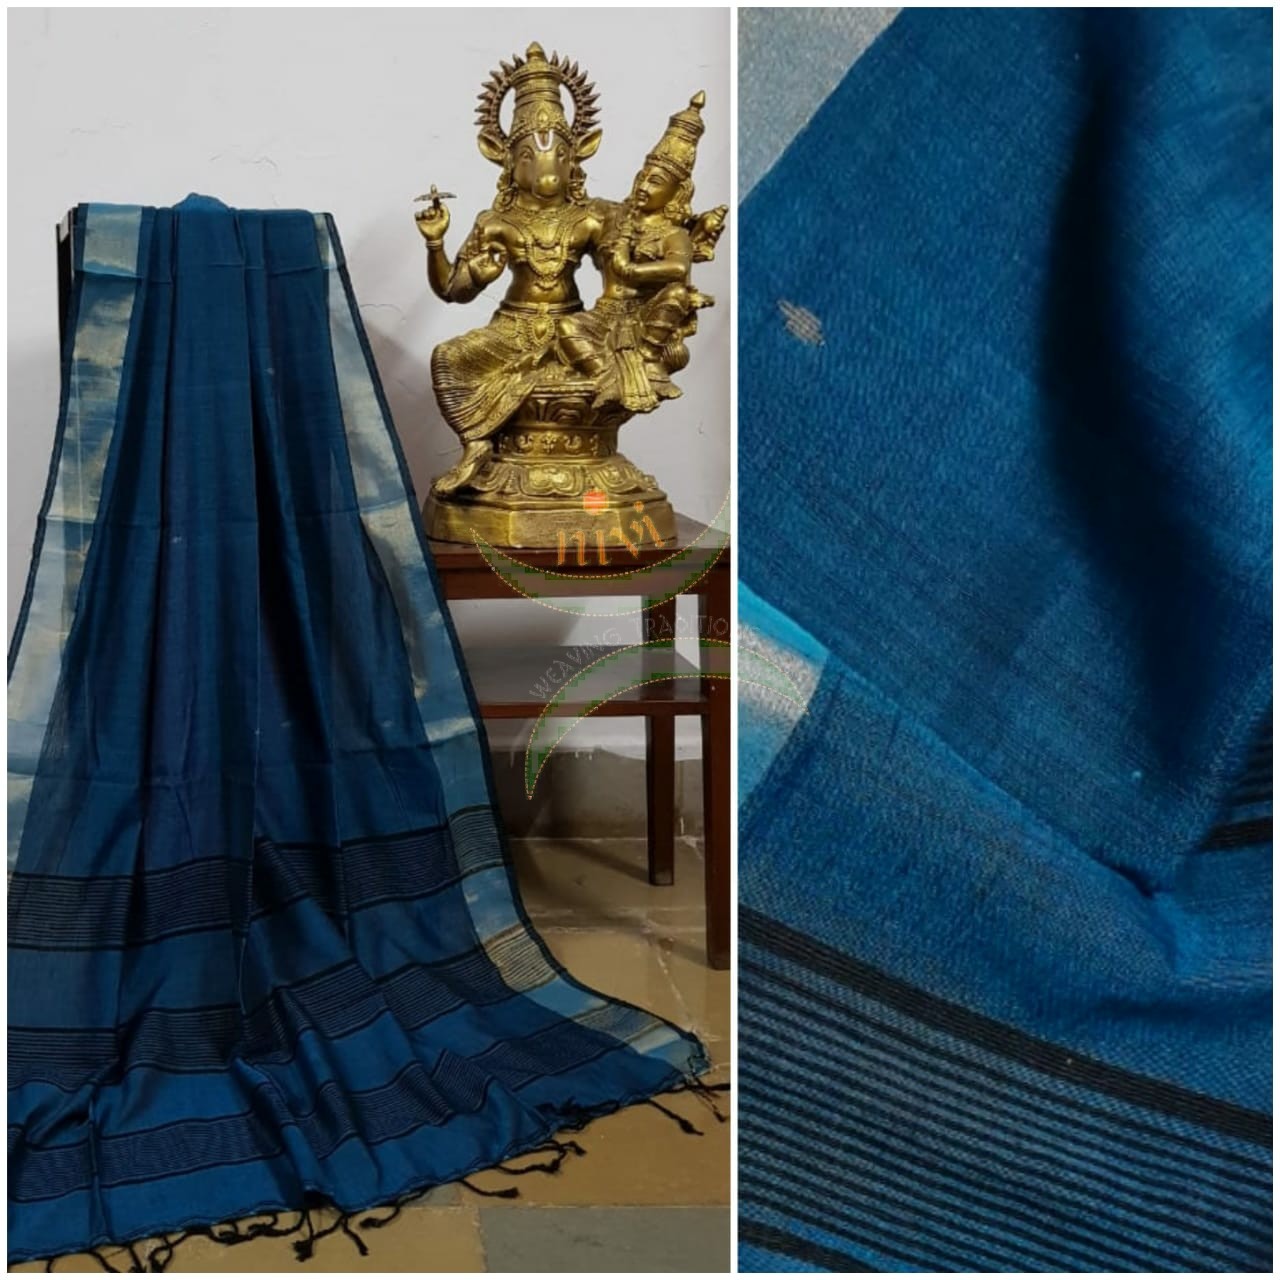 Teal blue handloom dupatta subtle gold borders and buttis on the body. And striped black borders